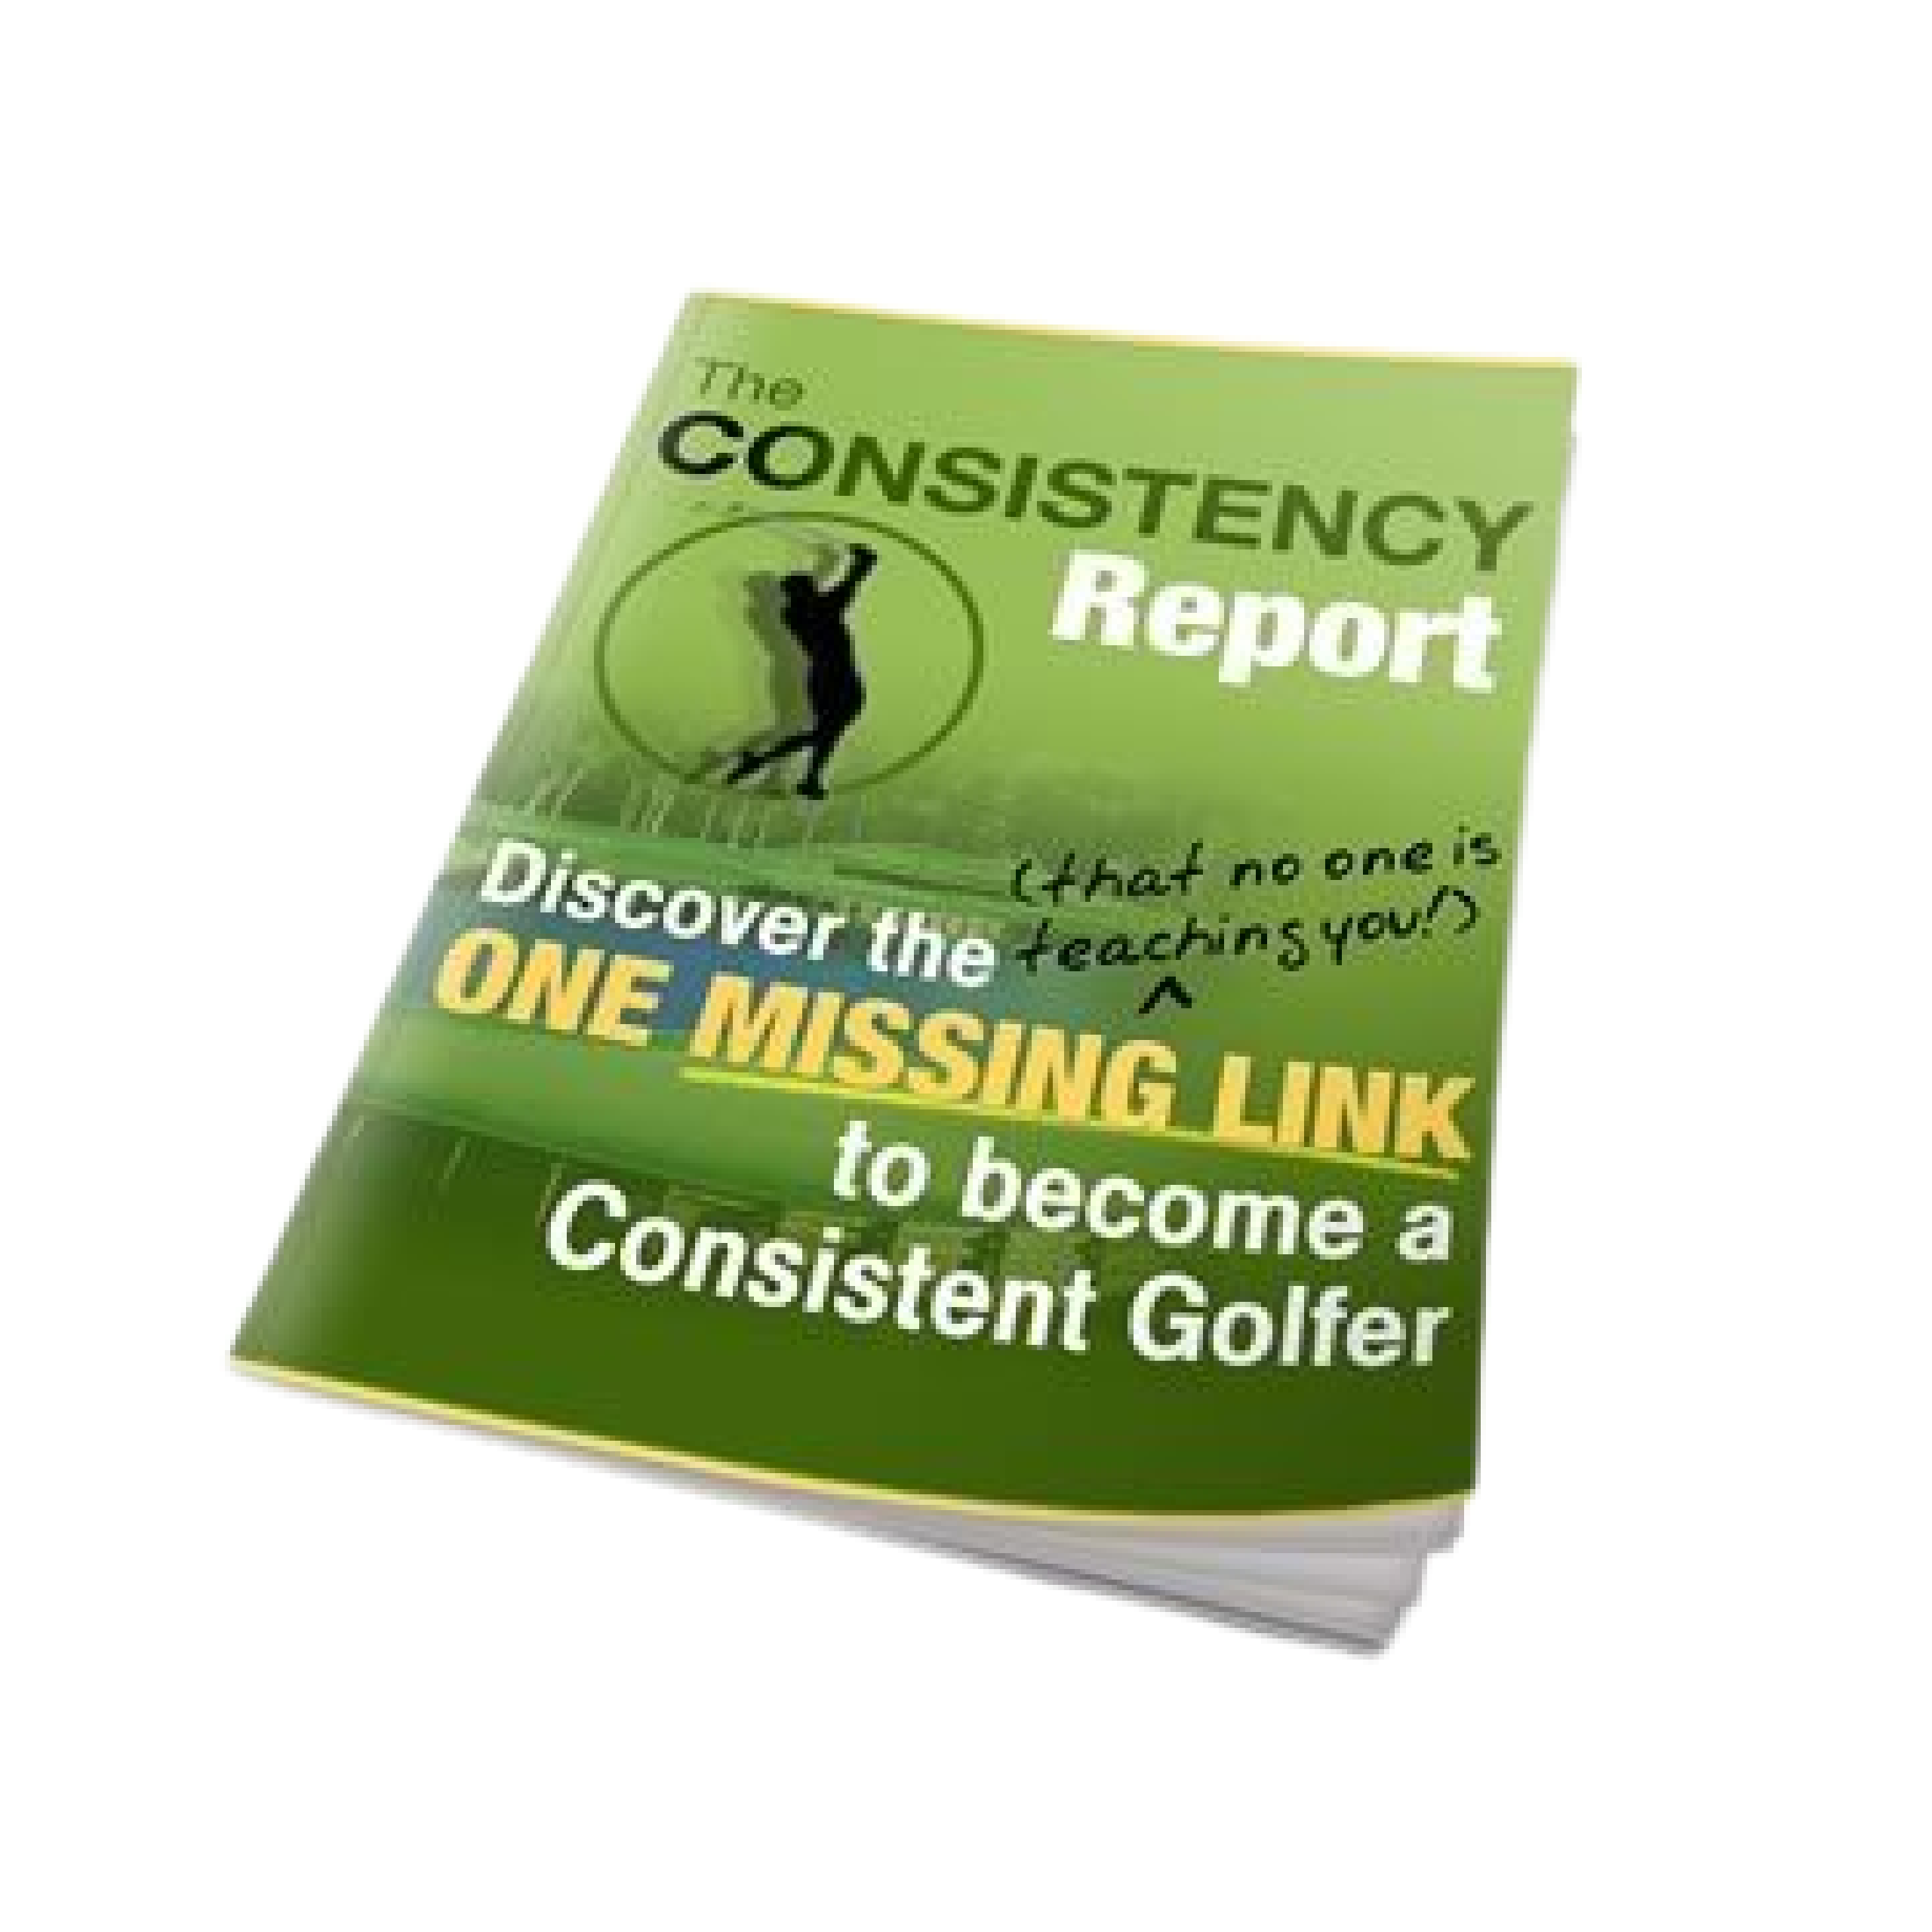 The Consistency Report